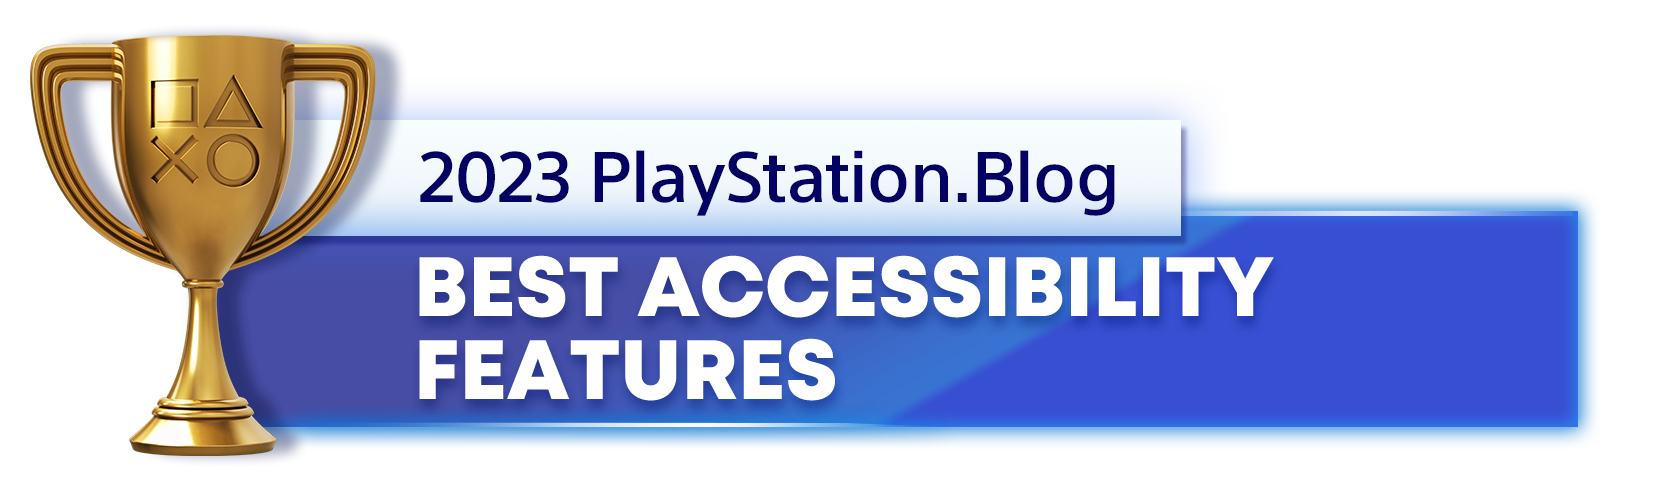  "Gold Trophy for the 2023 PlayStation Blog Best Accessibility Features Winner"